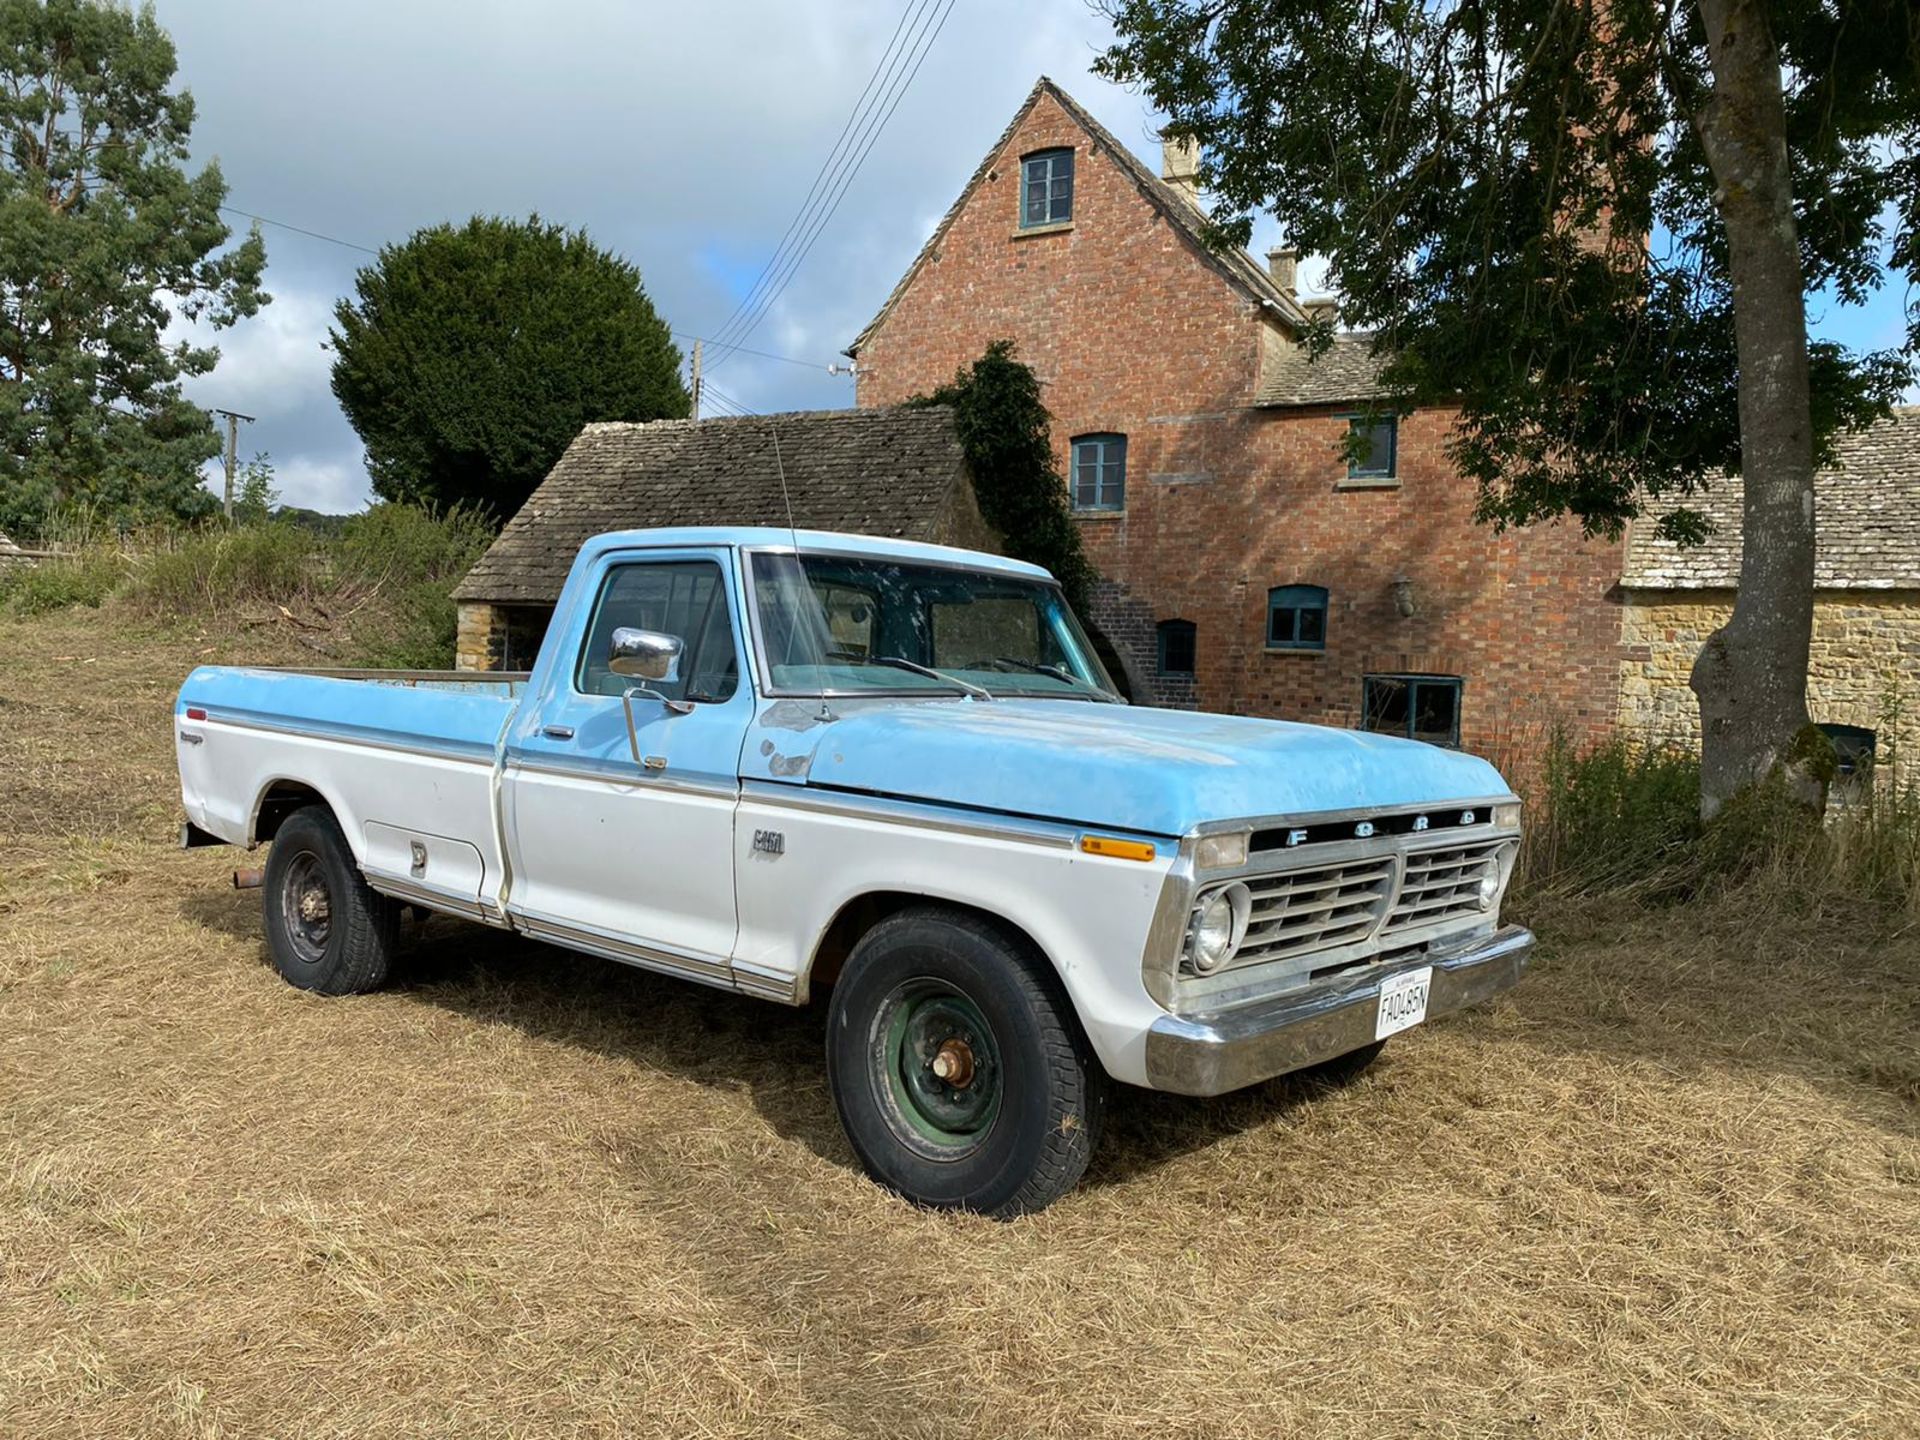 1975 FORD F-250 6.4 (390) V8, 4 SPEED MANUAL, HAS JUST BEEN REGISTERED, NEW BENCH SEAT *NO VAT* - Image 14 of 22